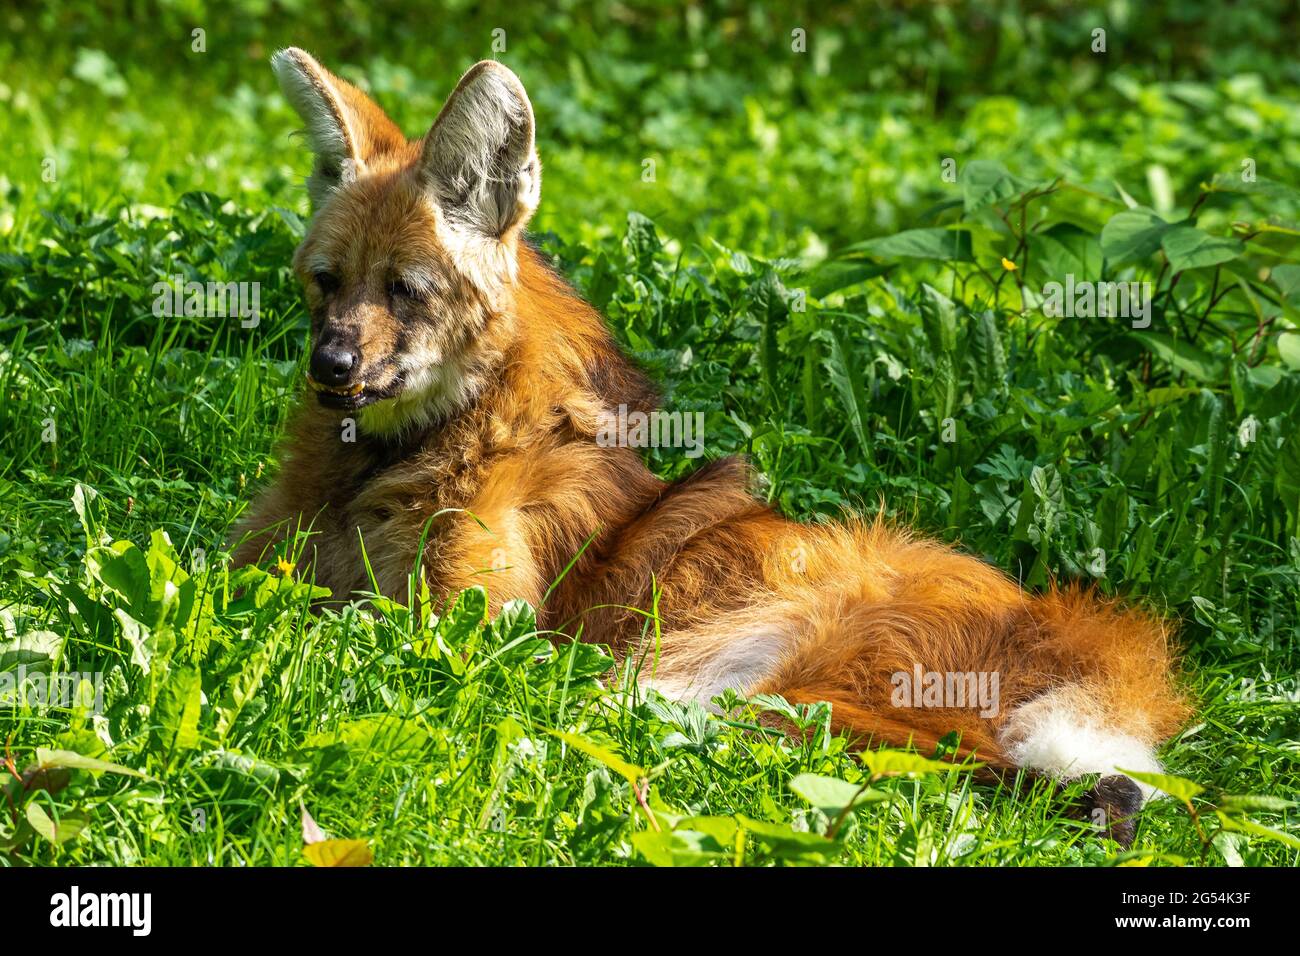 The Maned Wolf, Chrysocyon brachyurus is the largest canid of South America.  This mammal lives in open and semi-open habitats, especially grasslands w  Stock Photo - Alamy